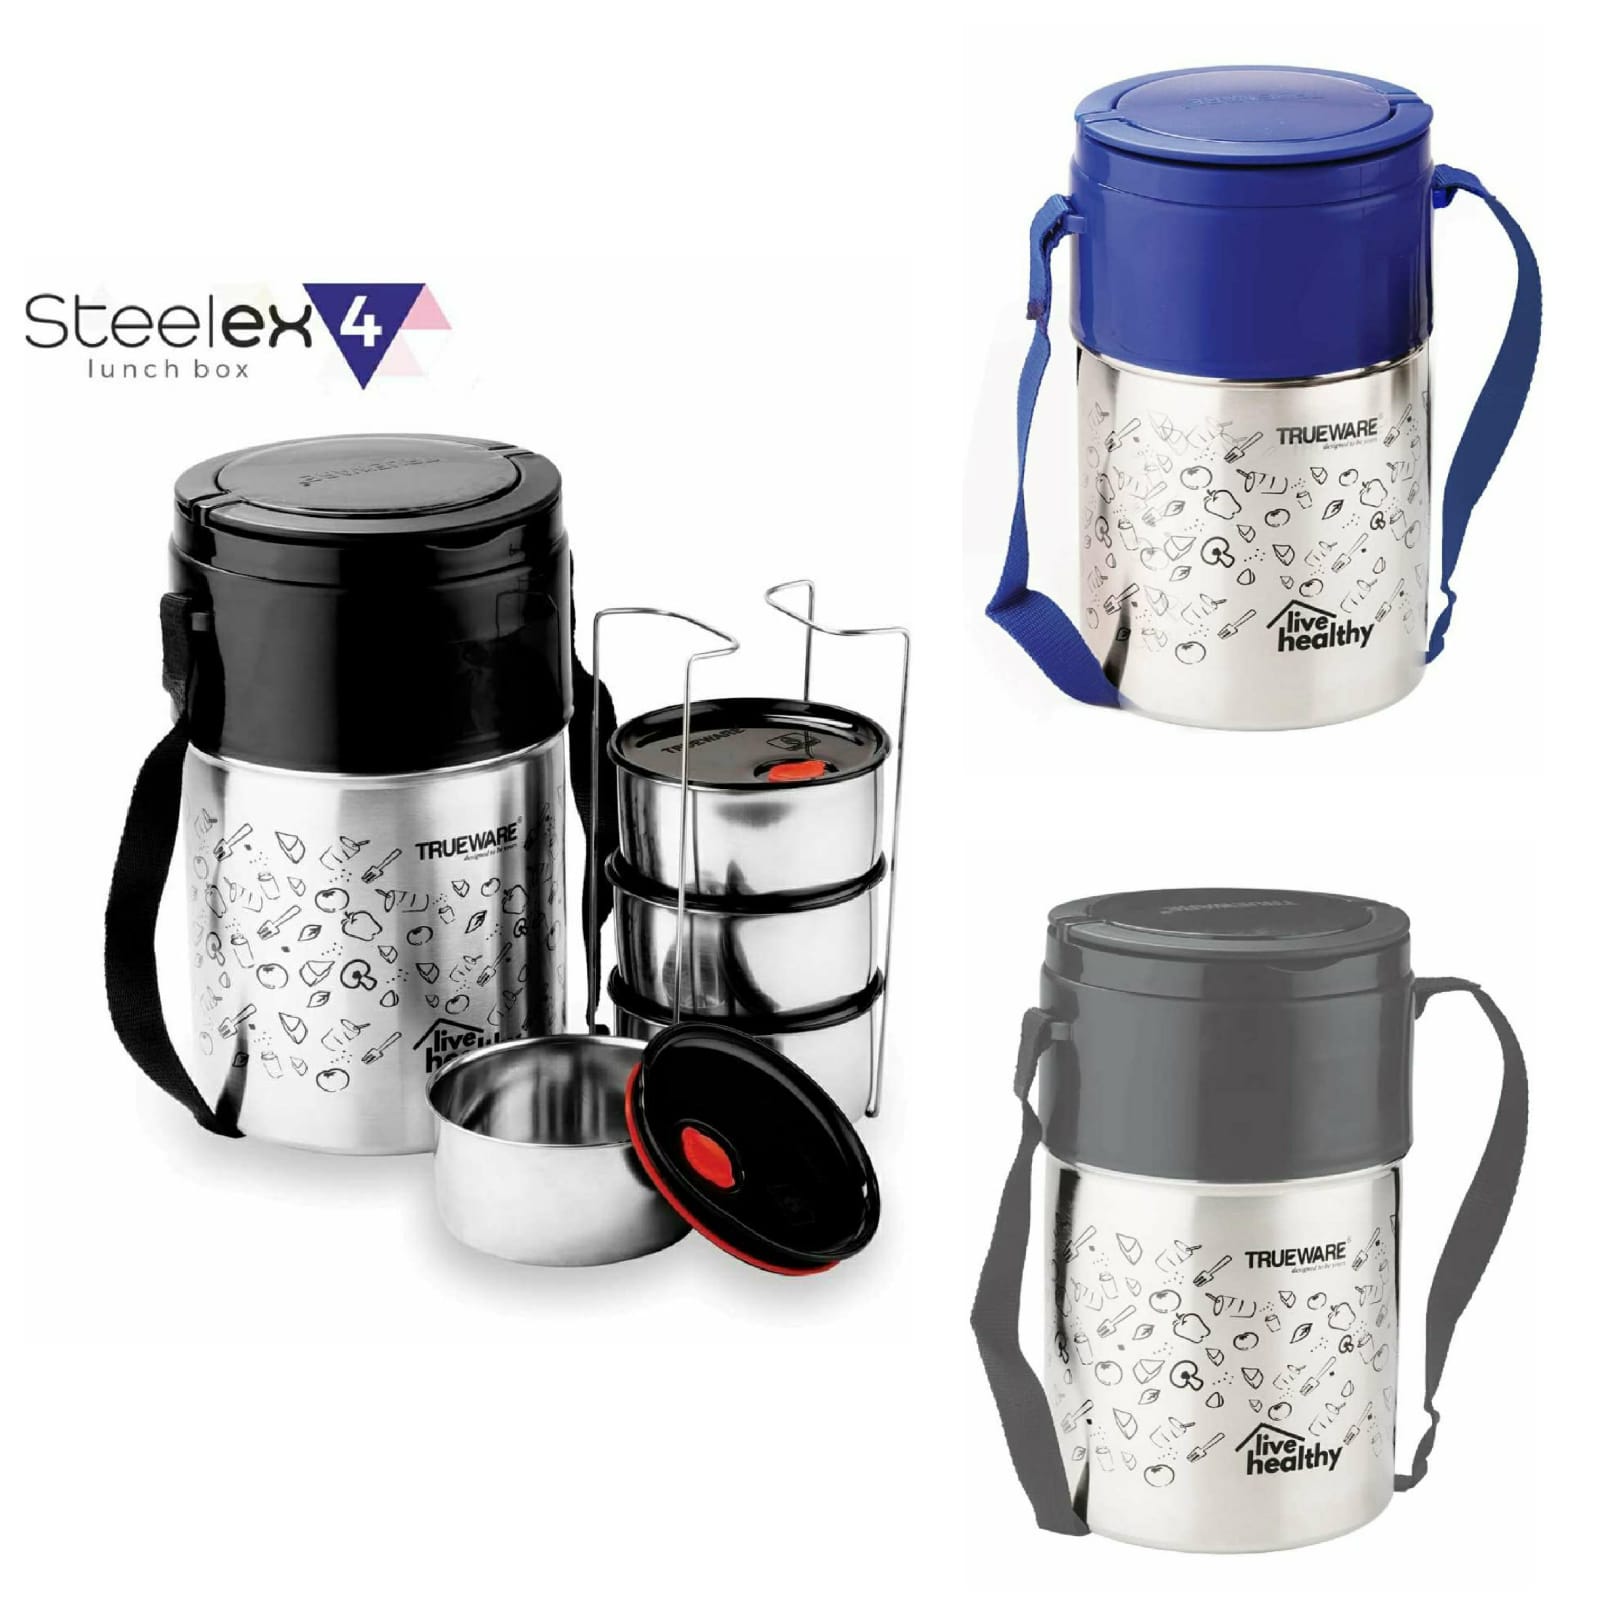 Trueware Steelex 4 Lunch Box, Stainless Steel Each 350ml 4Container, Insulated Lunch Carrier, 1piece